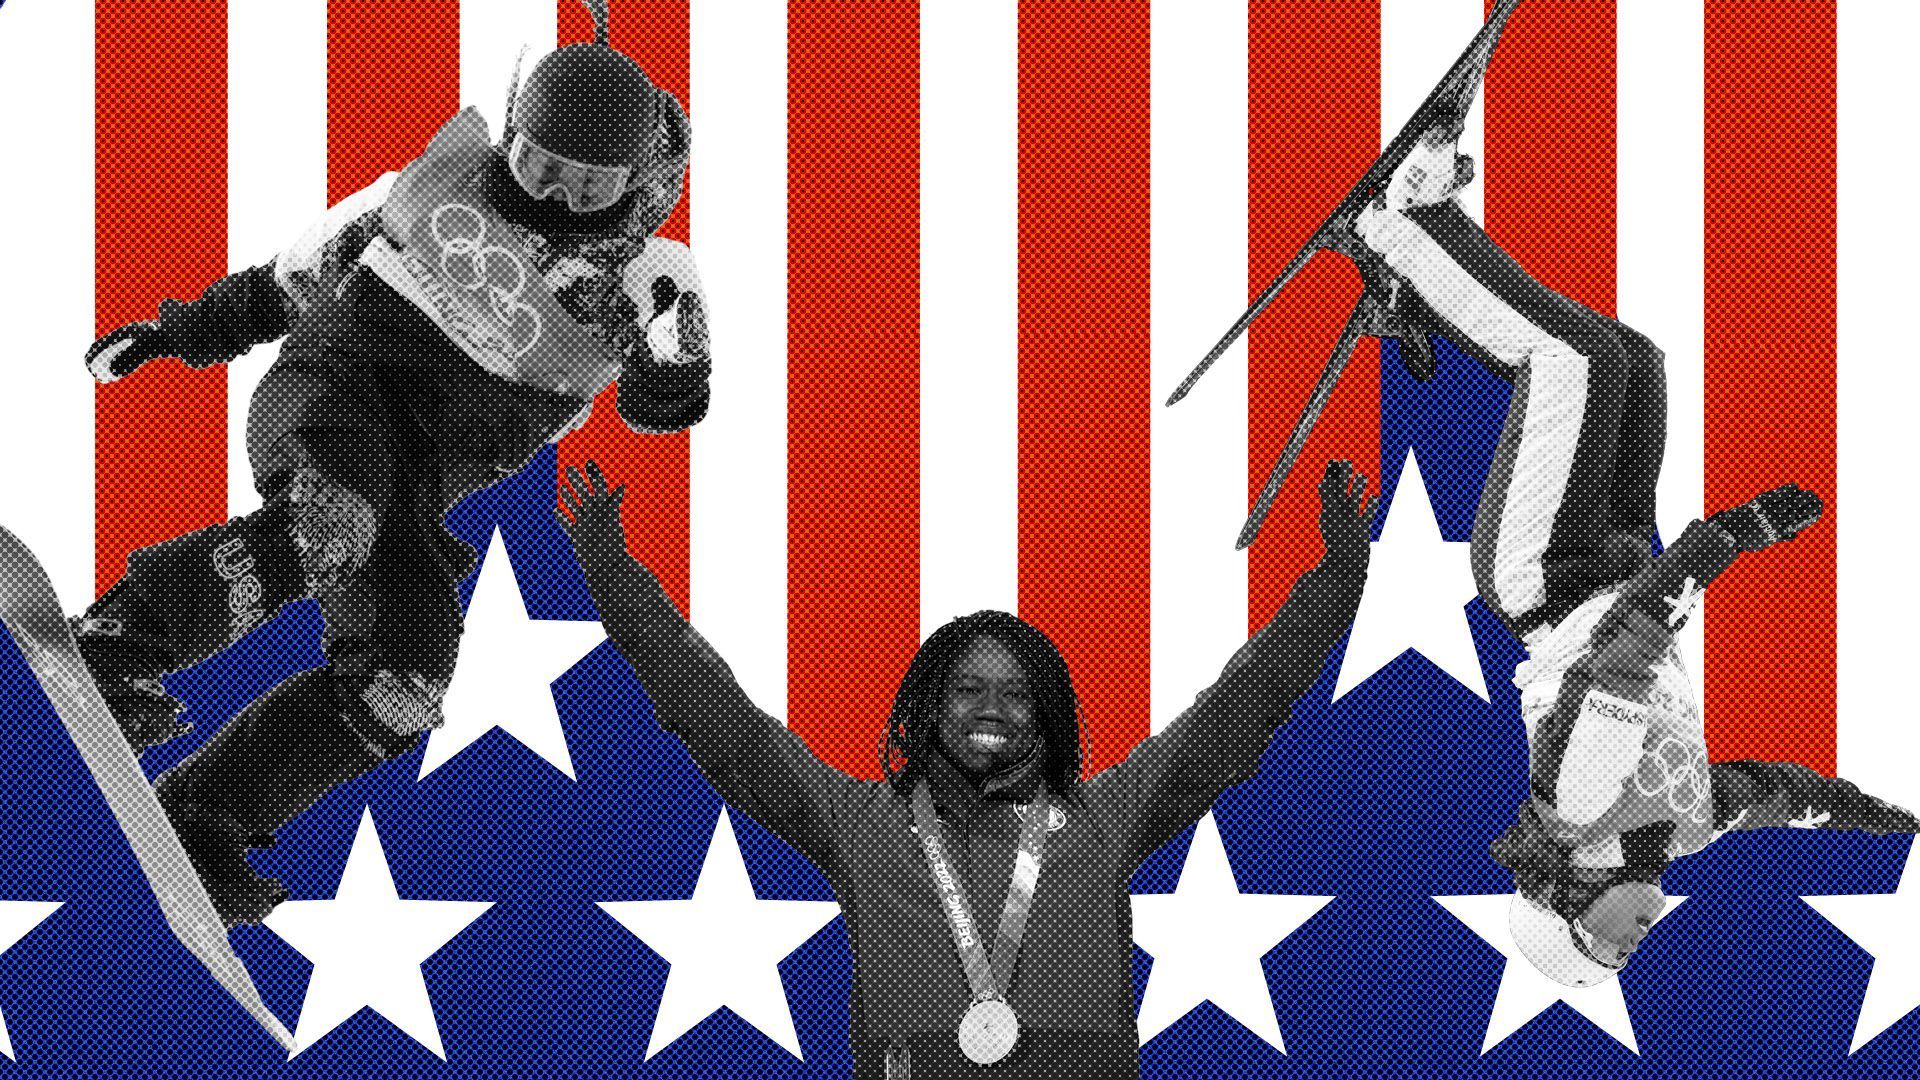 Photo illustration of Team USA members Chloe Kim, Erin Jackson and Ashley Caldwell against a background of stars and stripes.